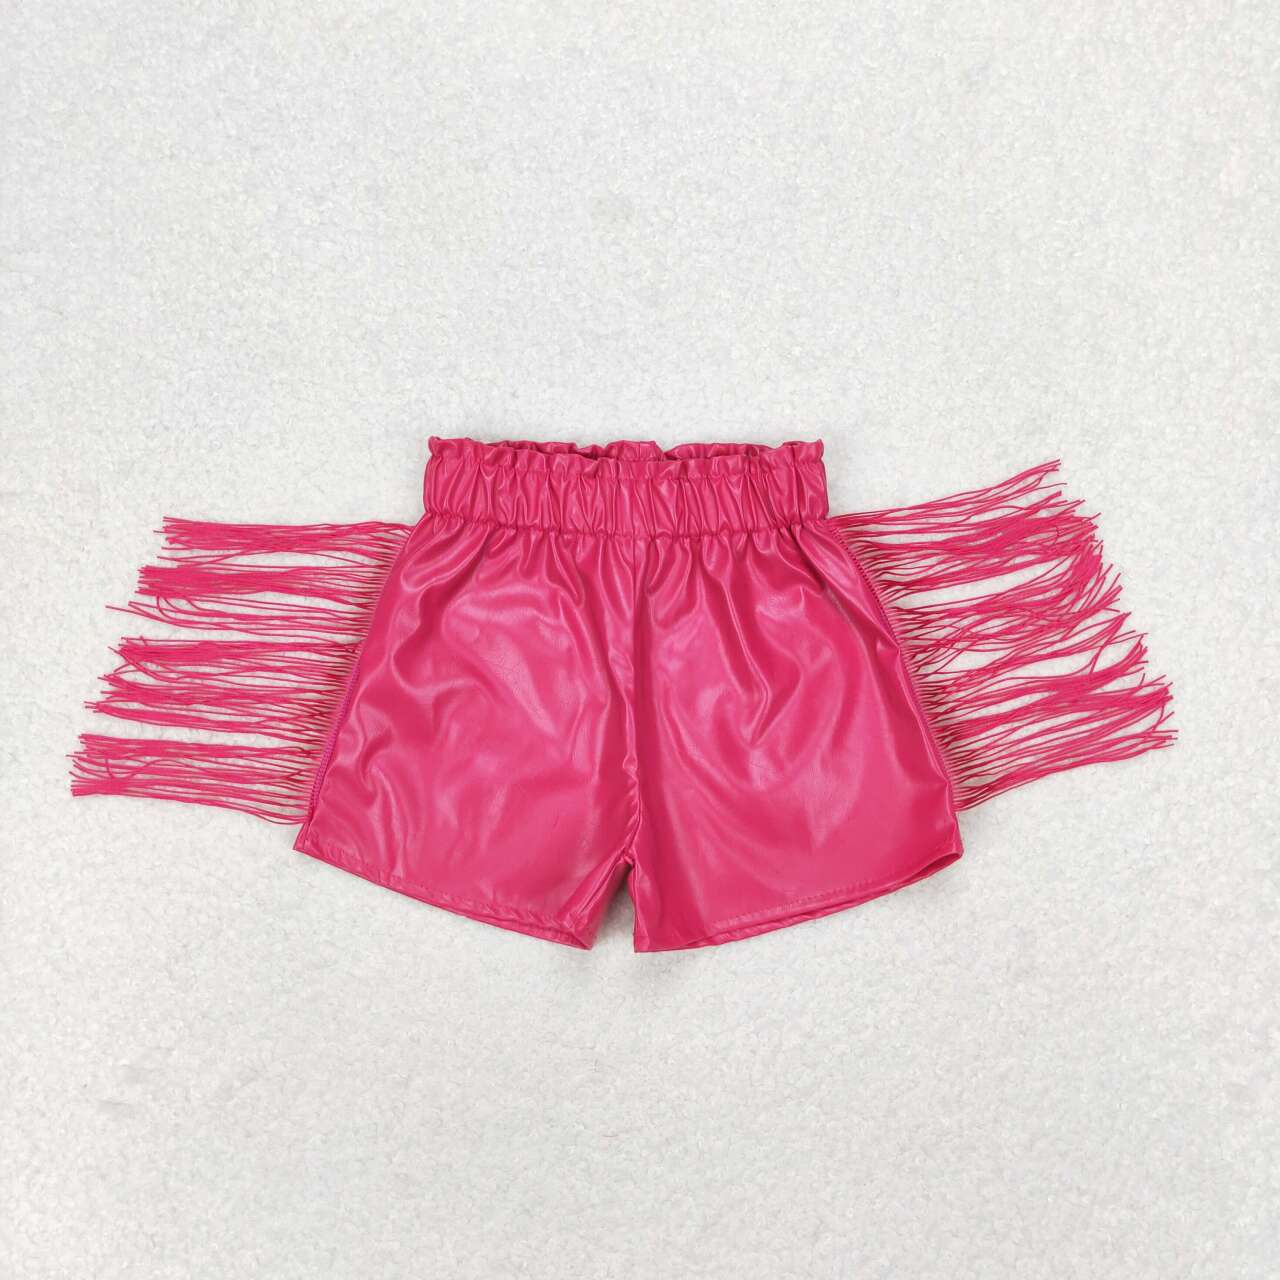 rts no moq SS0223 Rose red glossy leather fringed shorts